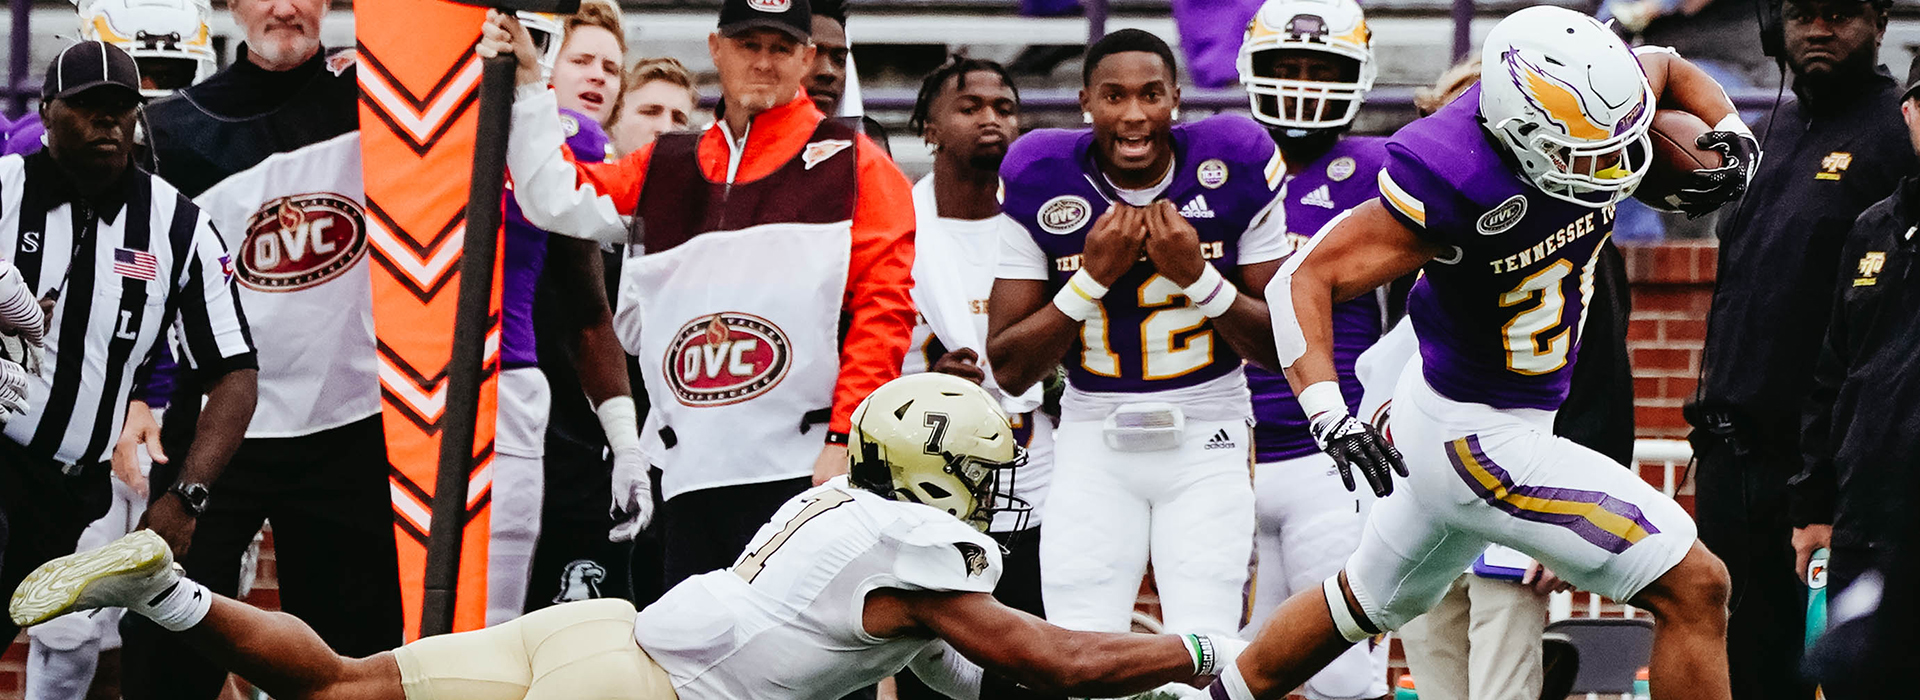 Tech football holds off Lindenwood for Homecoming victory